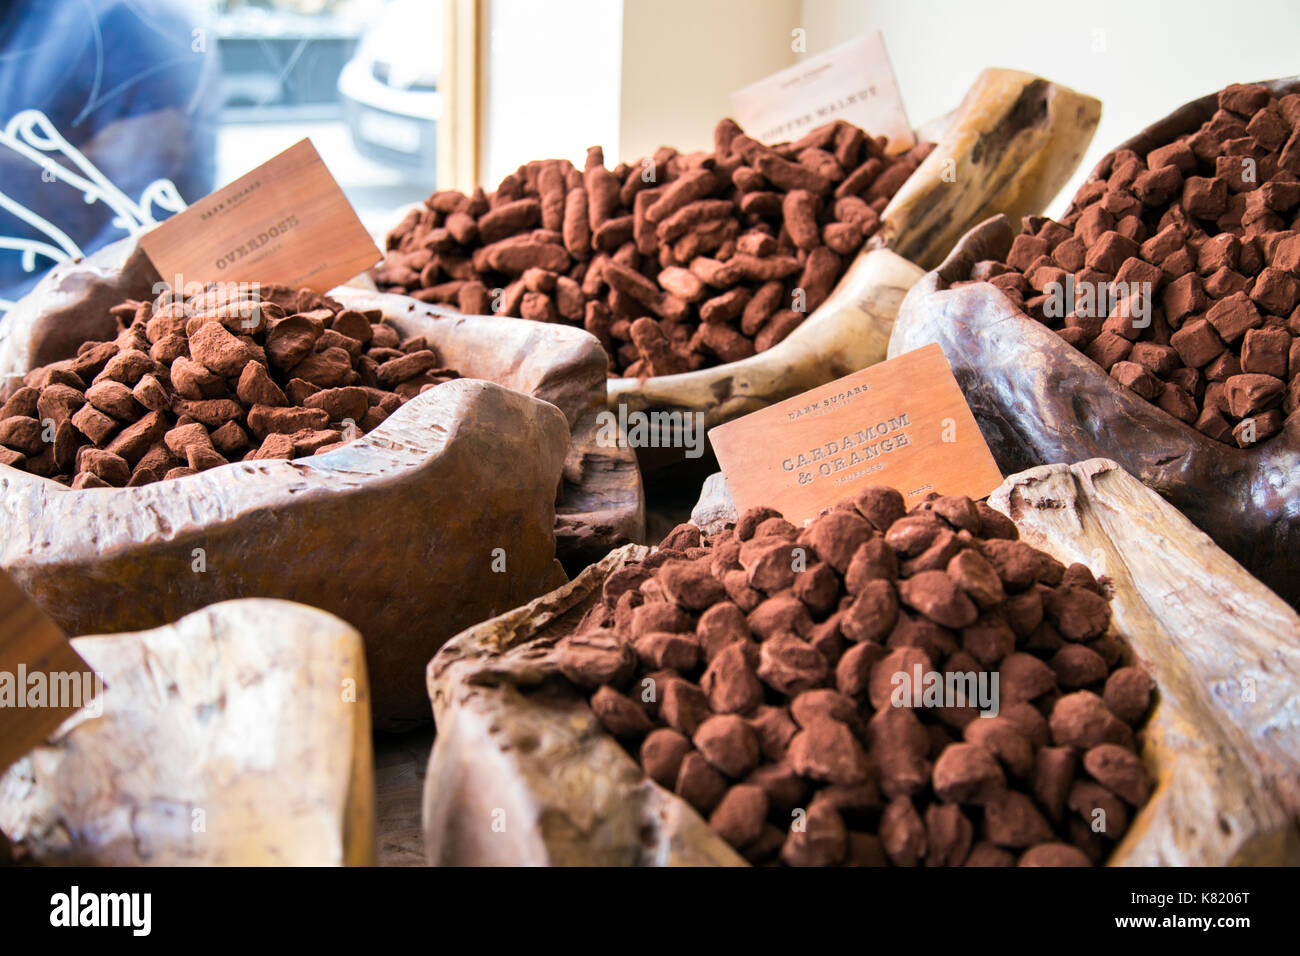 Cocoa dusted truffles on display in wooden bowls (Dark Sugars Cocoa House, London, UK) Stock Photo